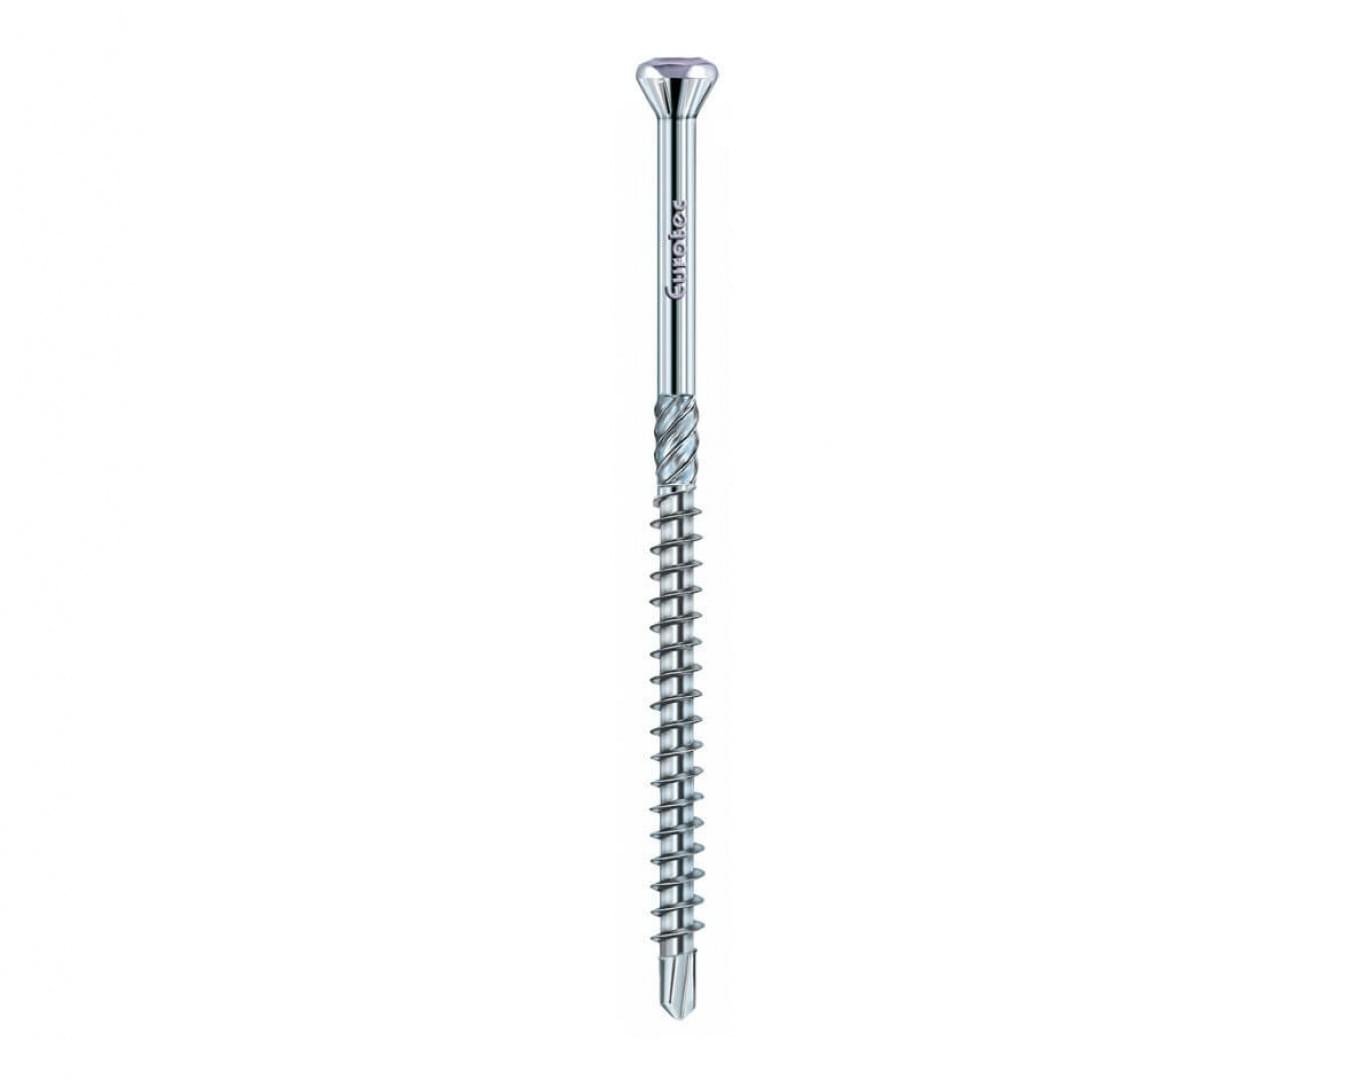 Hobotec Ornamental Head, Hardened Stainless Steel from Amtrac